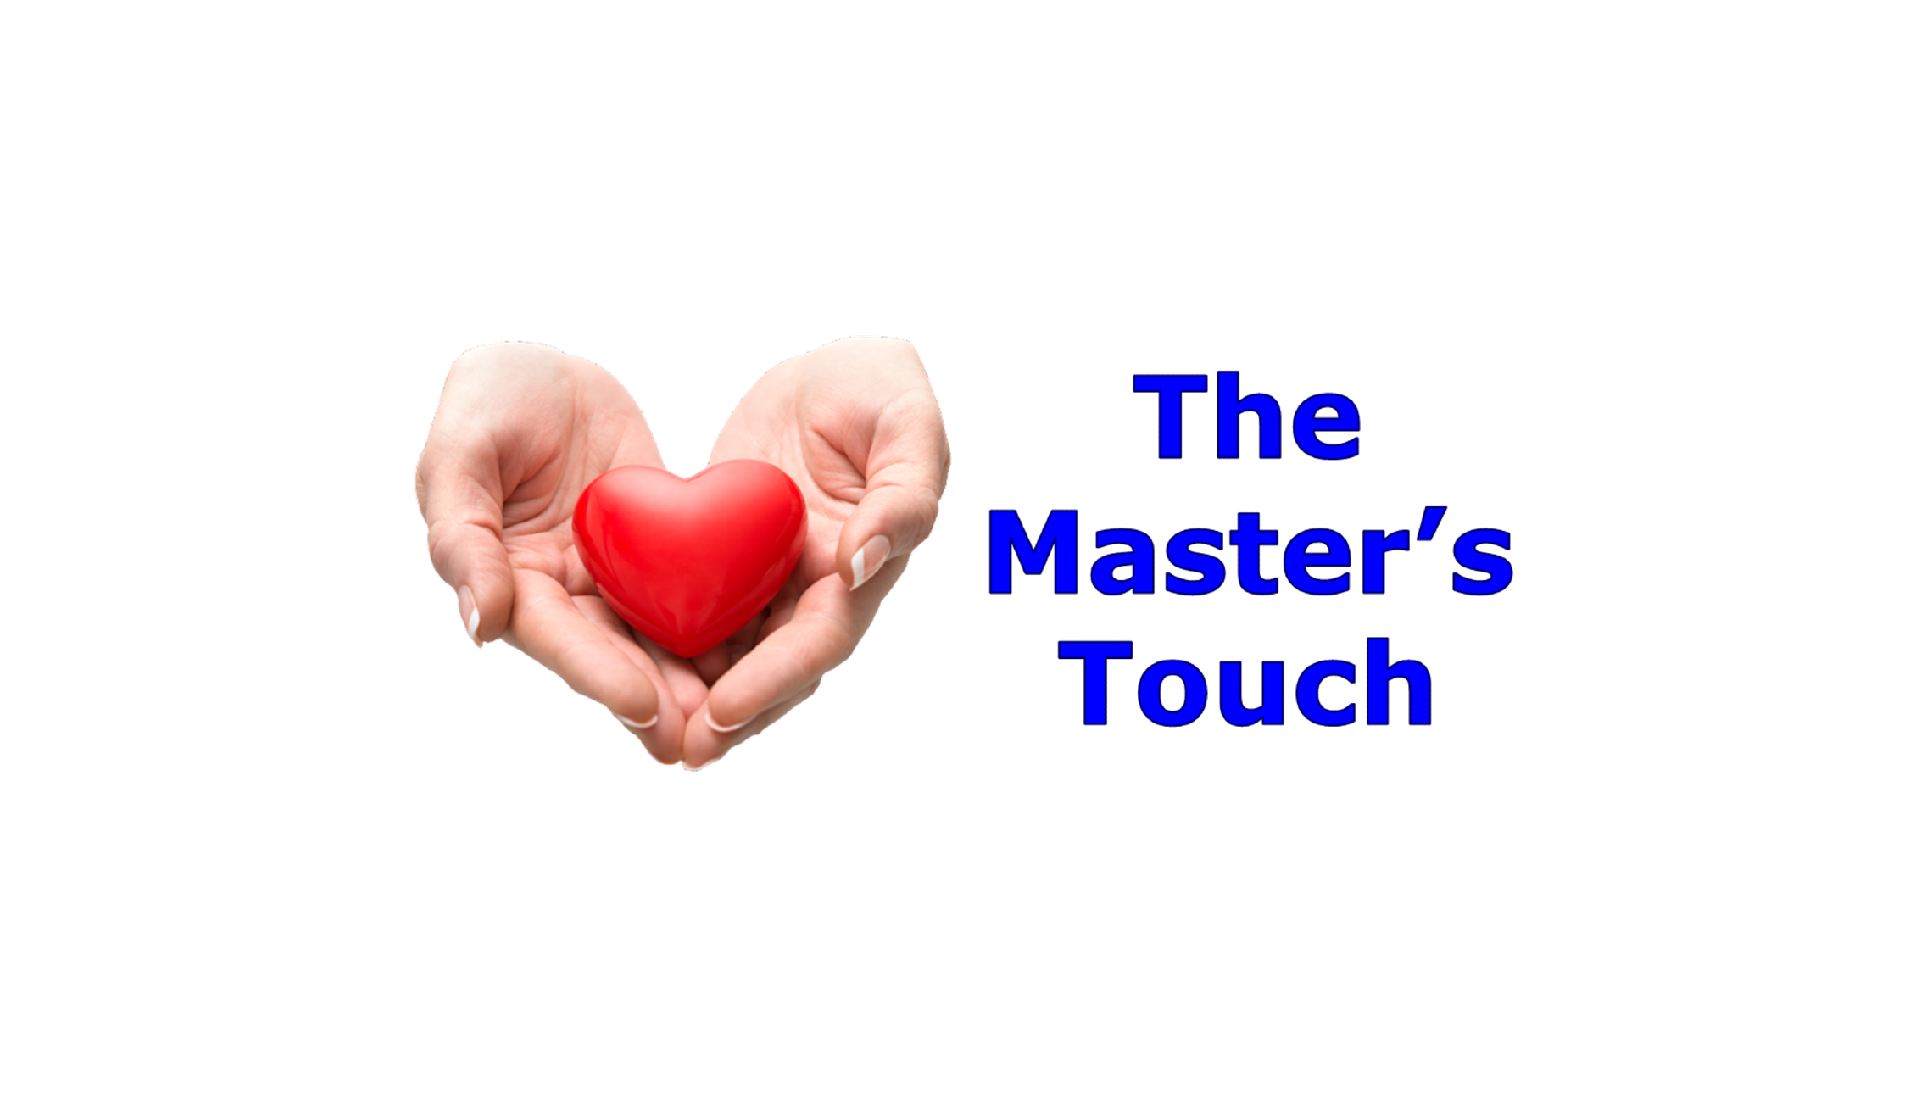 The Master’s Touch